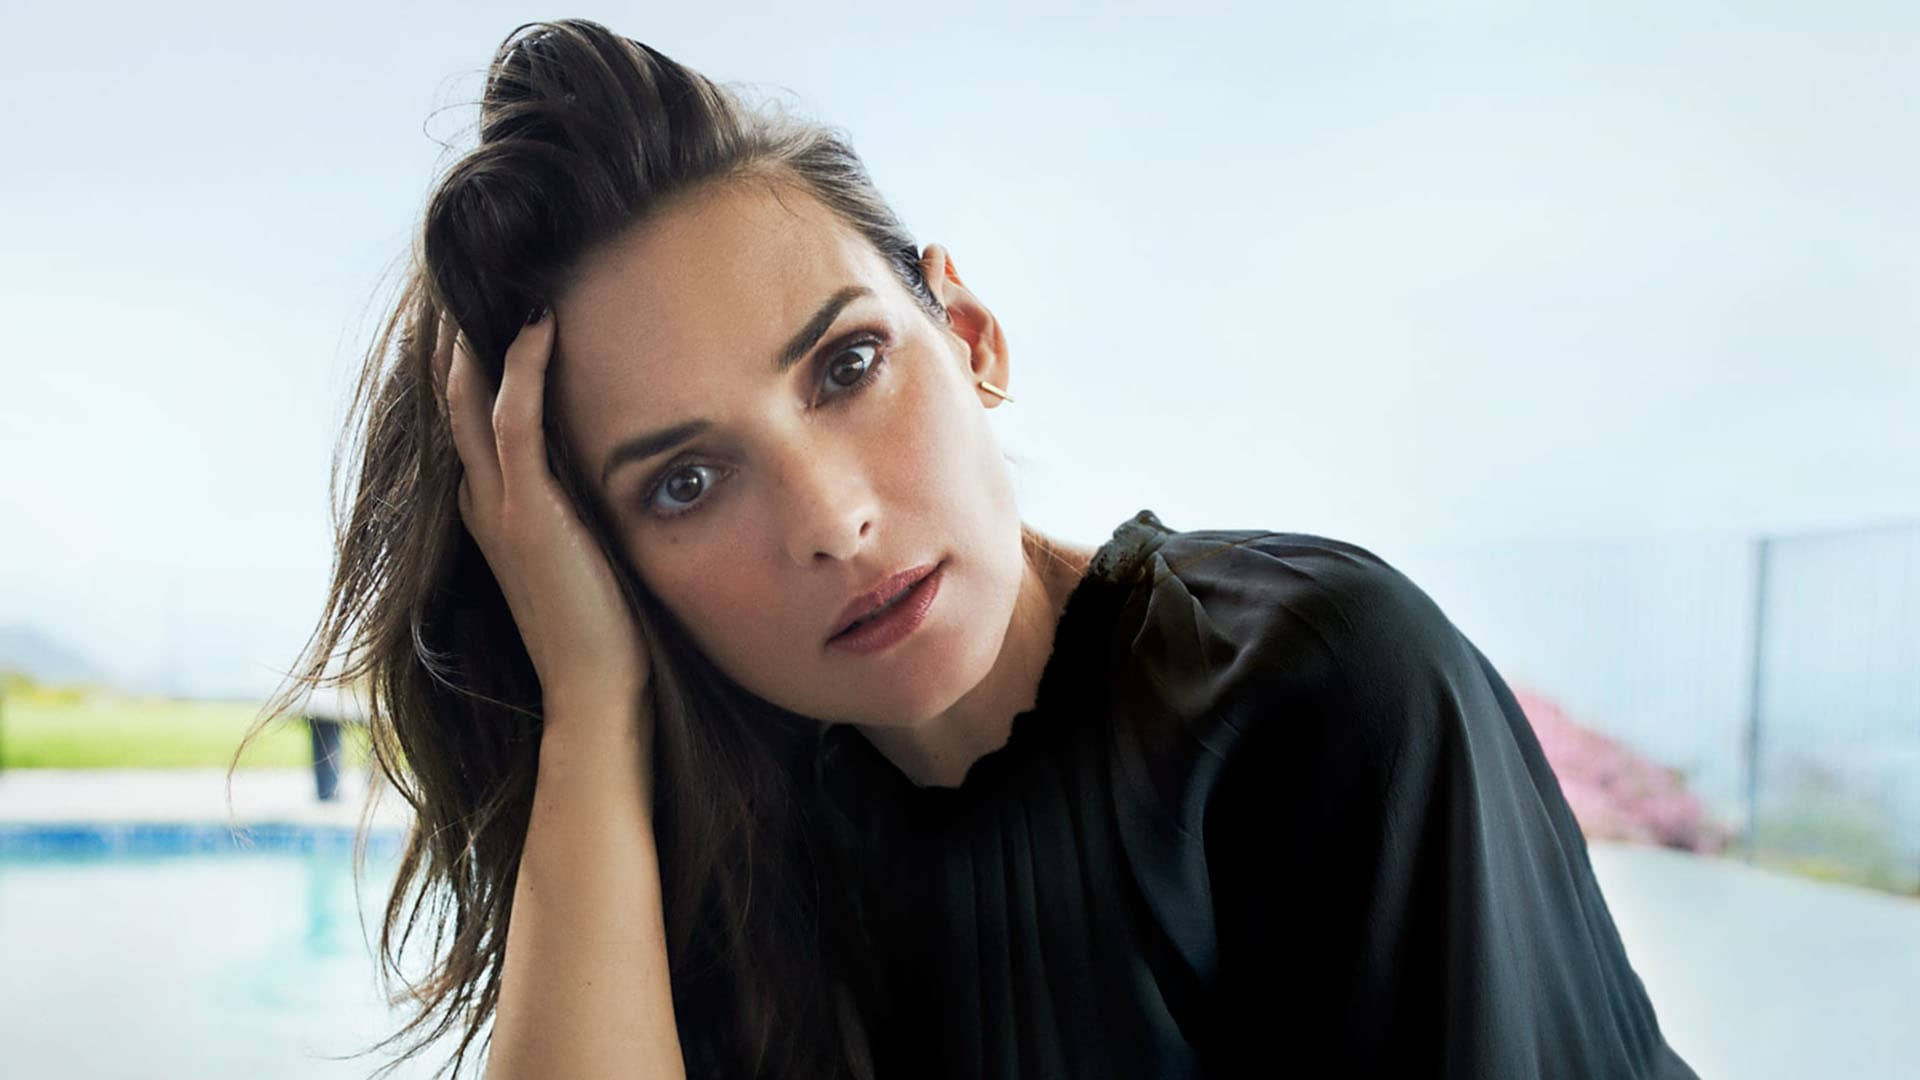 Winona Ryder's Exquisite Natural Beauty Wallpaper